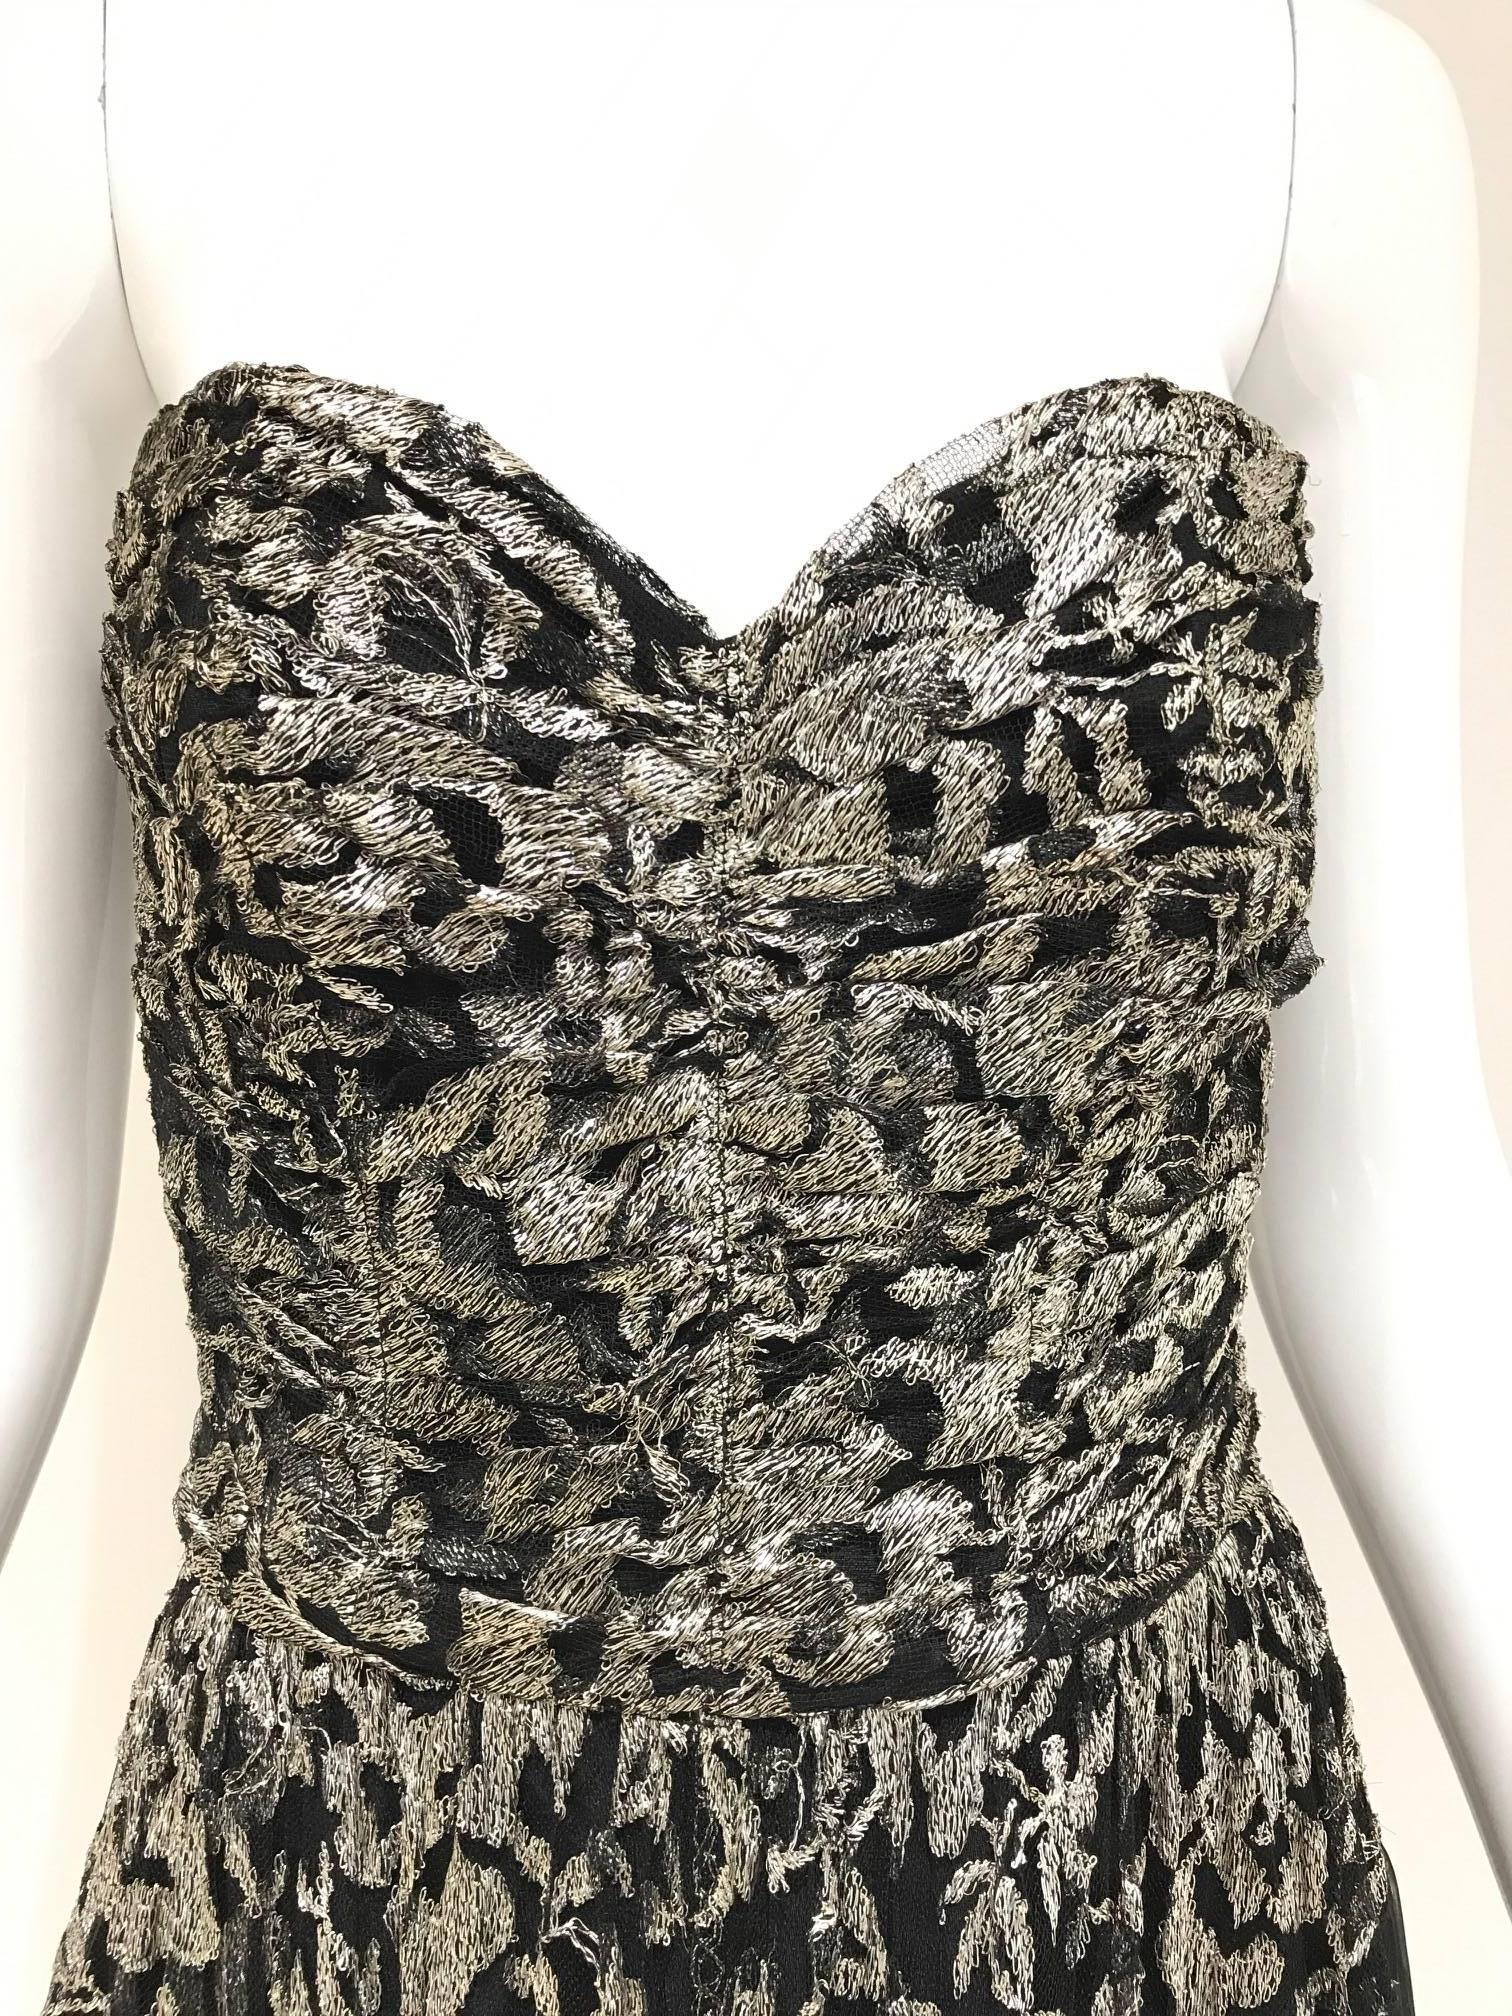 1930s strapless silver lame embroidered strapless cocktail dress.
Size 4